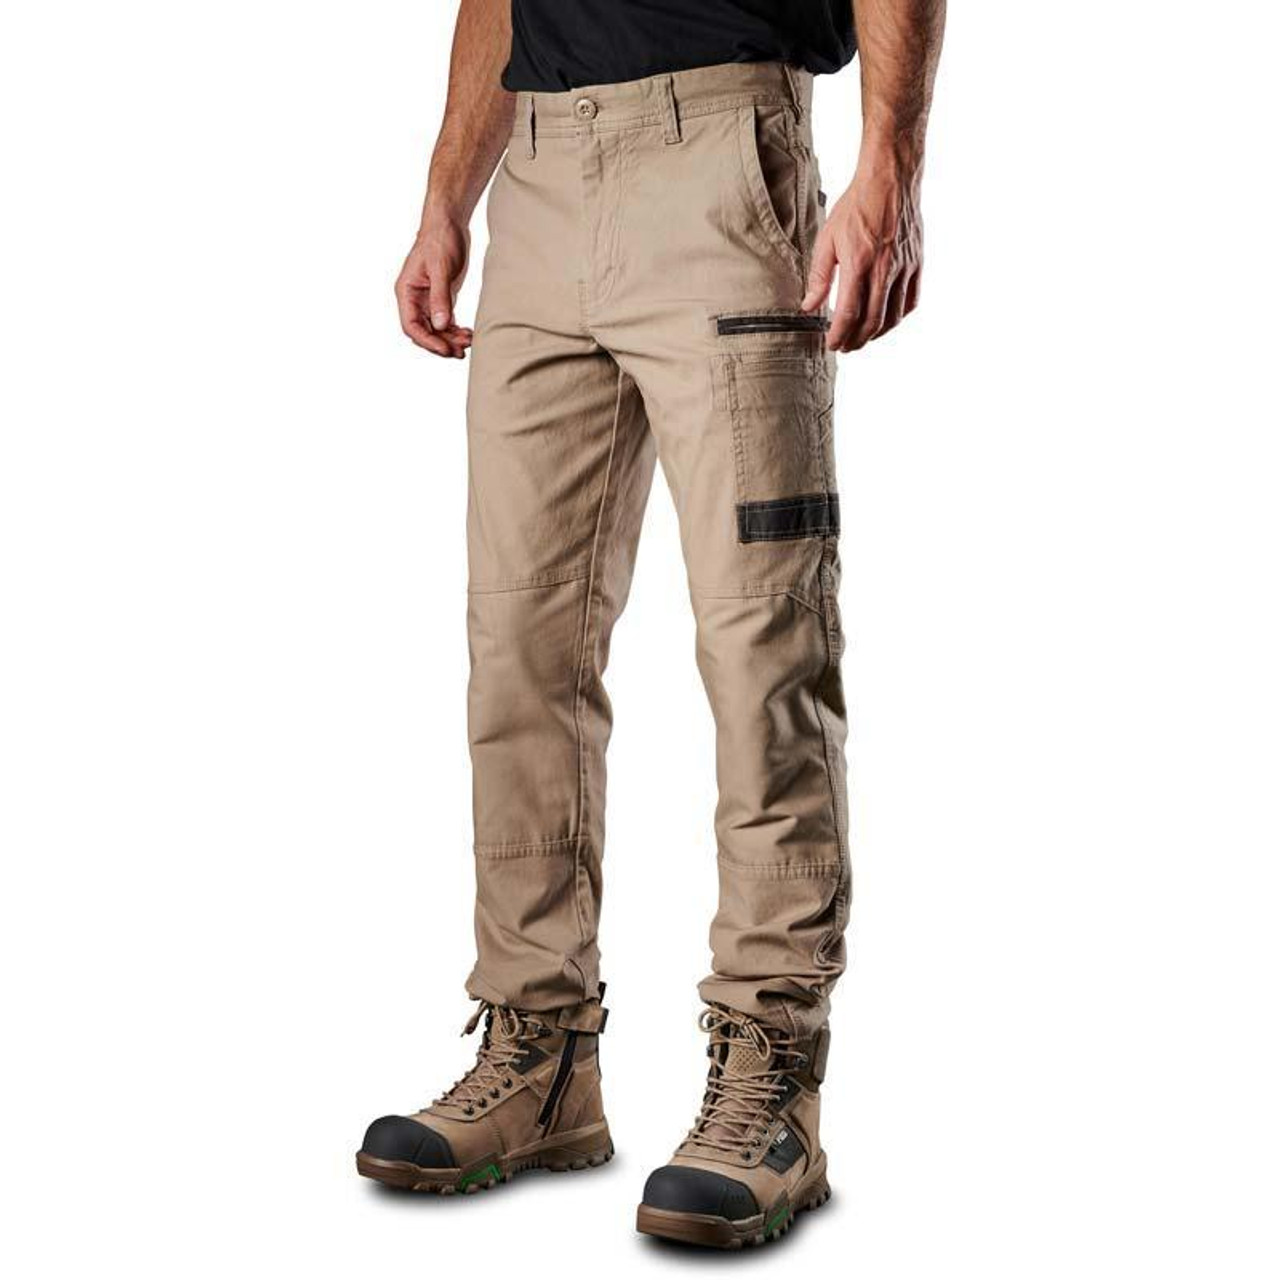 Alabama neighbor sand Fxd Men's Utility Multi Pocket Stretch Work Pant - Yeager's Sporting Goods